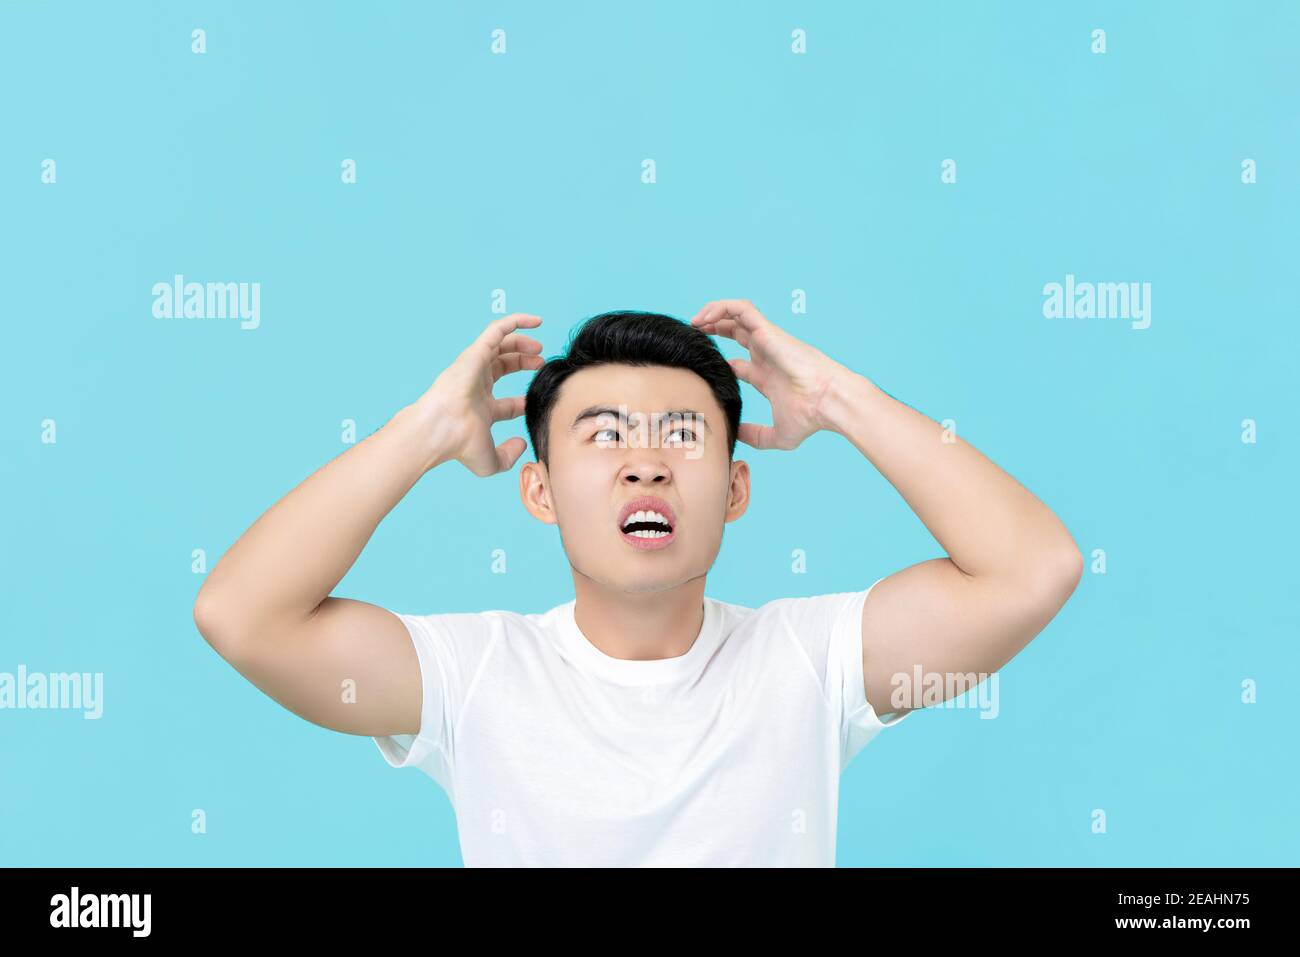 Upset angry Asian man with hands squeezing head isolated on light blue background Stock Photo